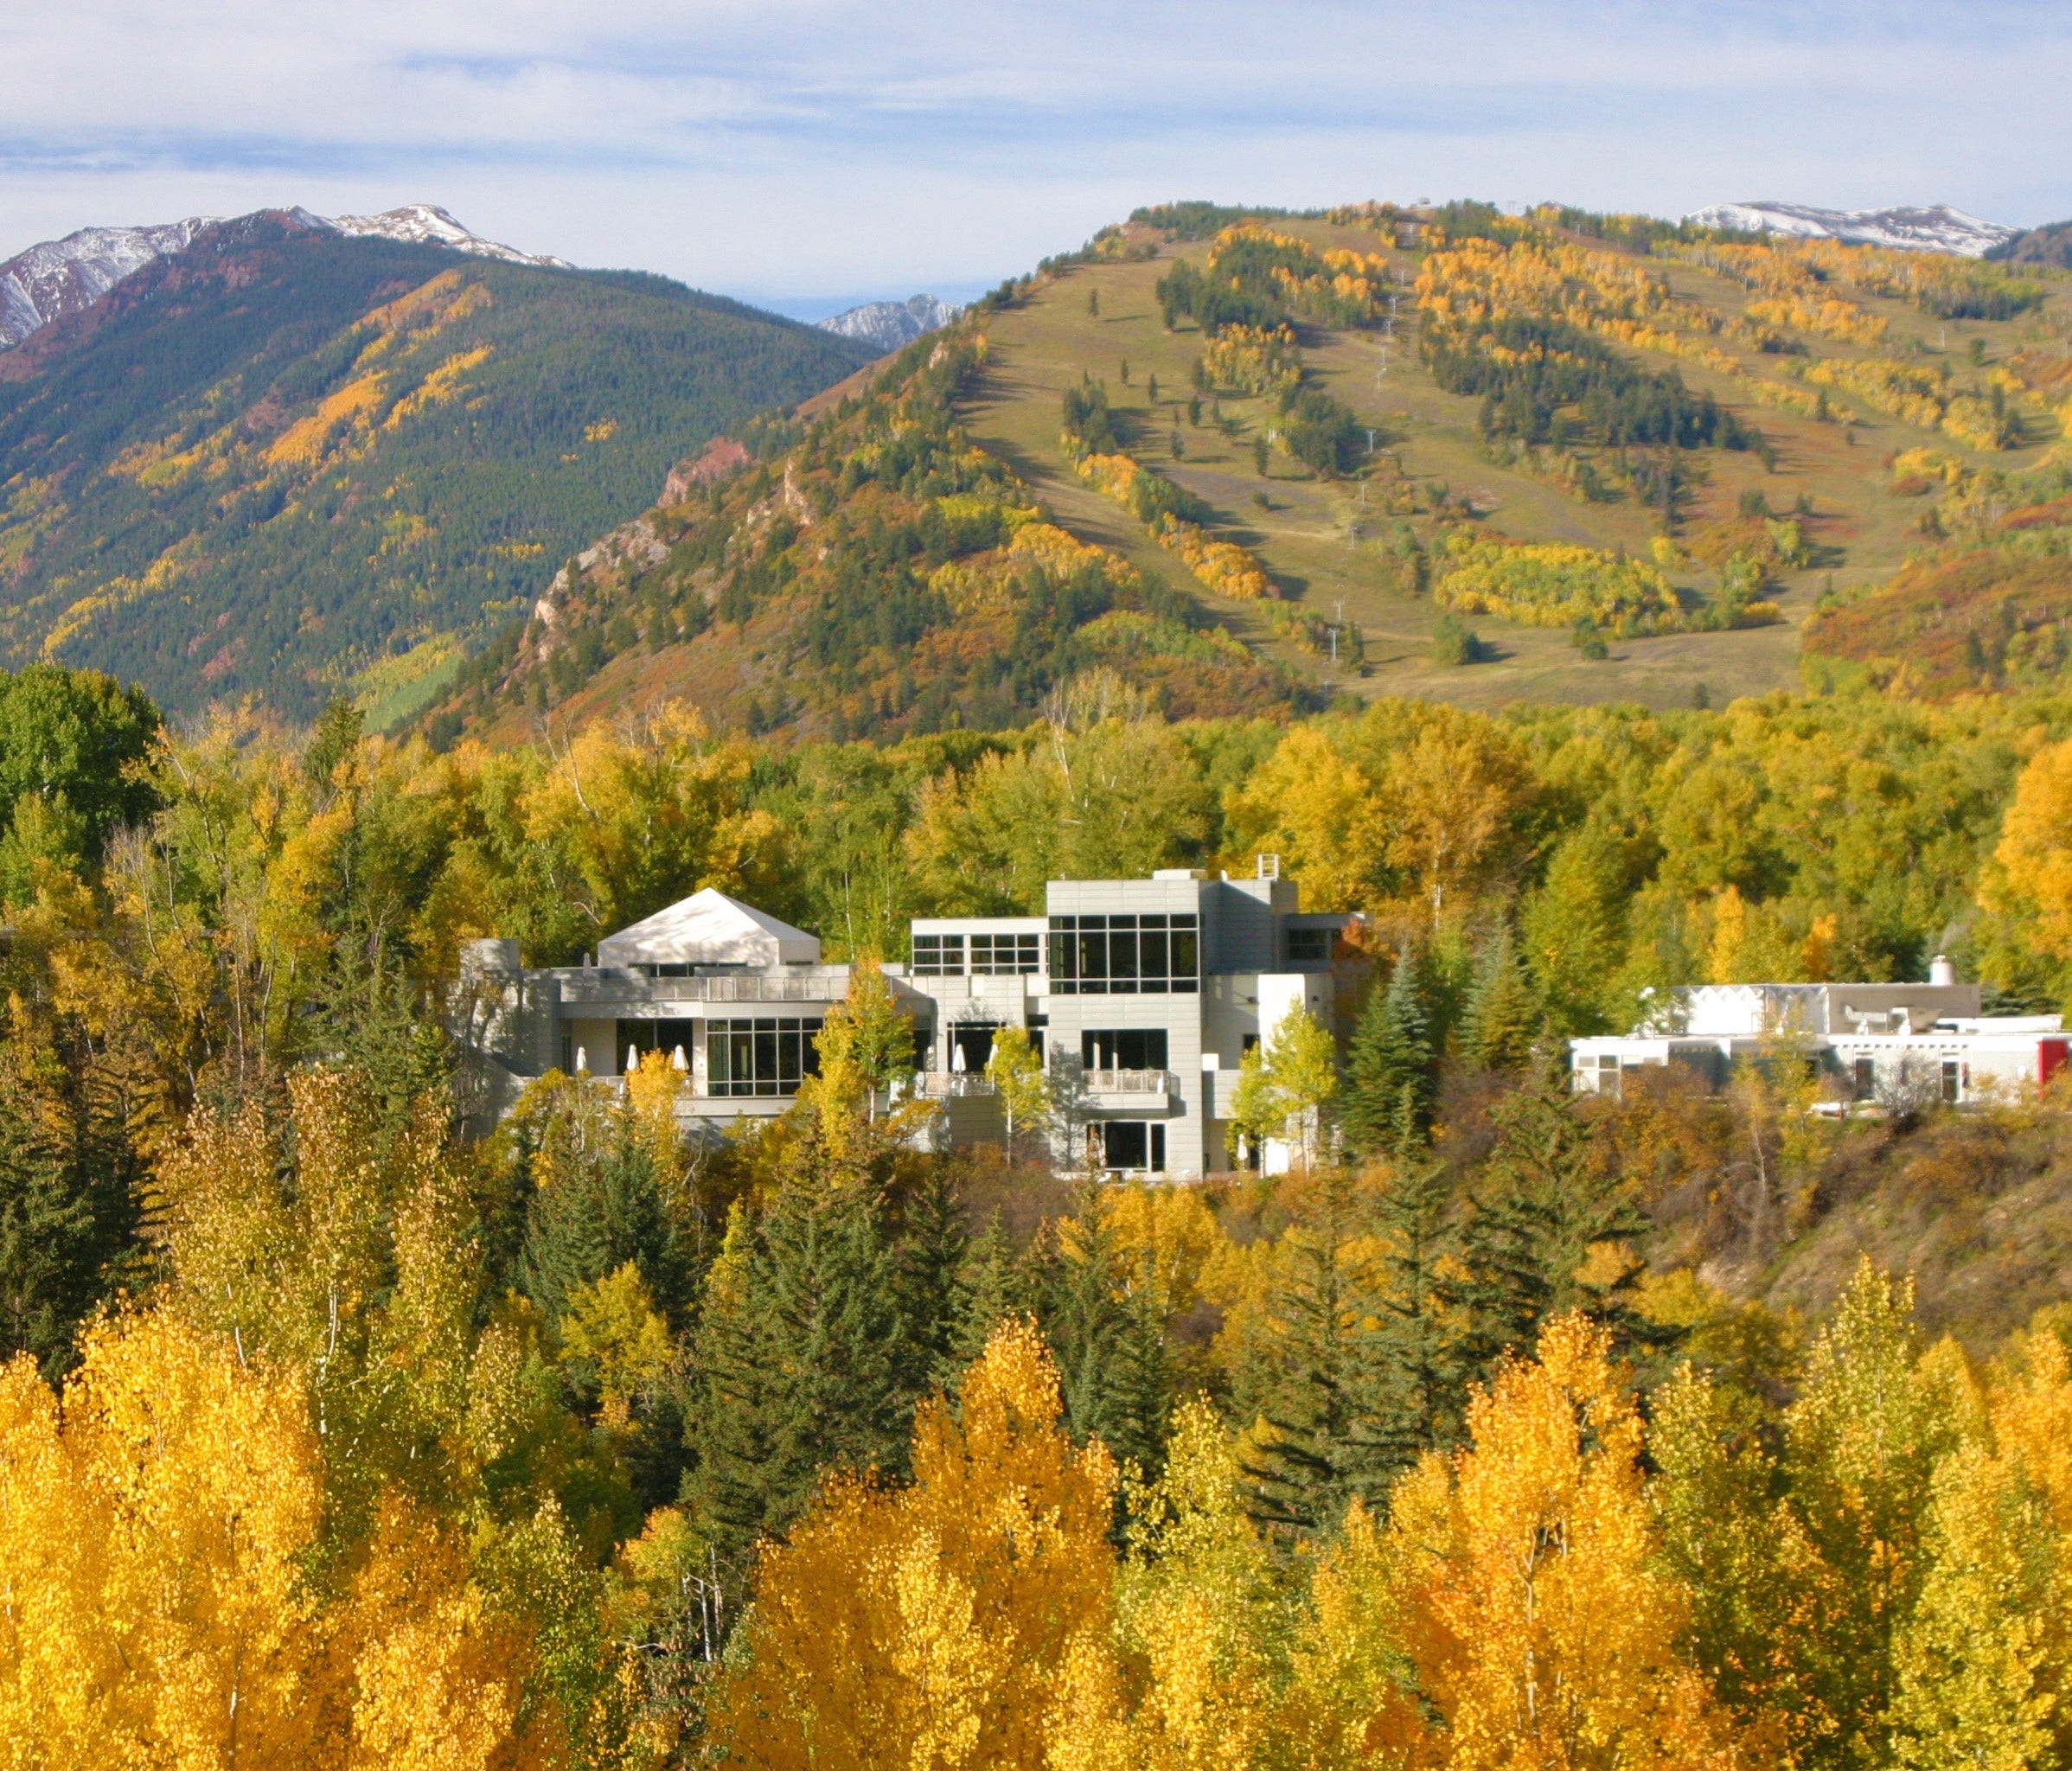 The average nightly hotel rate in Aspen this fall is $337 (34% savings compared to summer). At the Aspen Meadows Resort, the average price is $291 per night: https://www.tripadvisor.com/Hotel_Review-g29141-d82749-Reviews-Aspen_Meadows_Resort-Aspen_Co